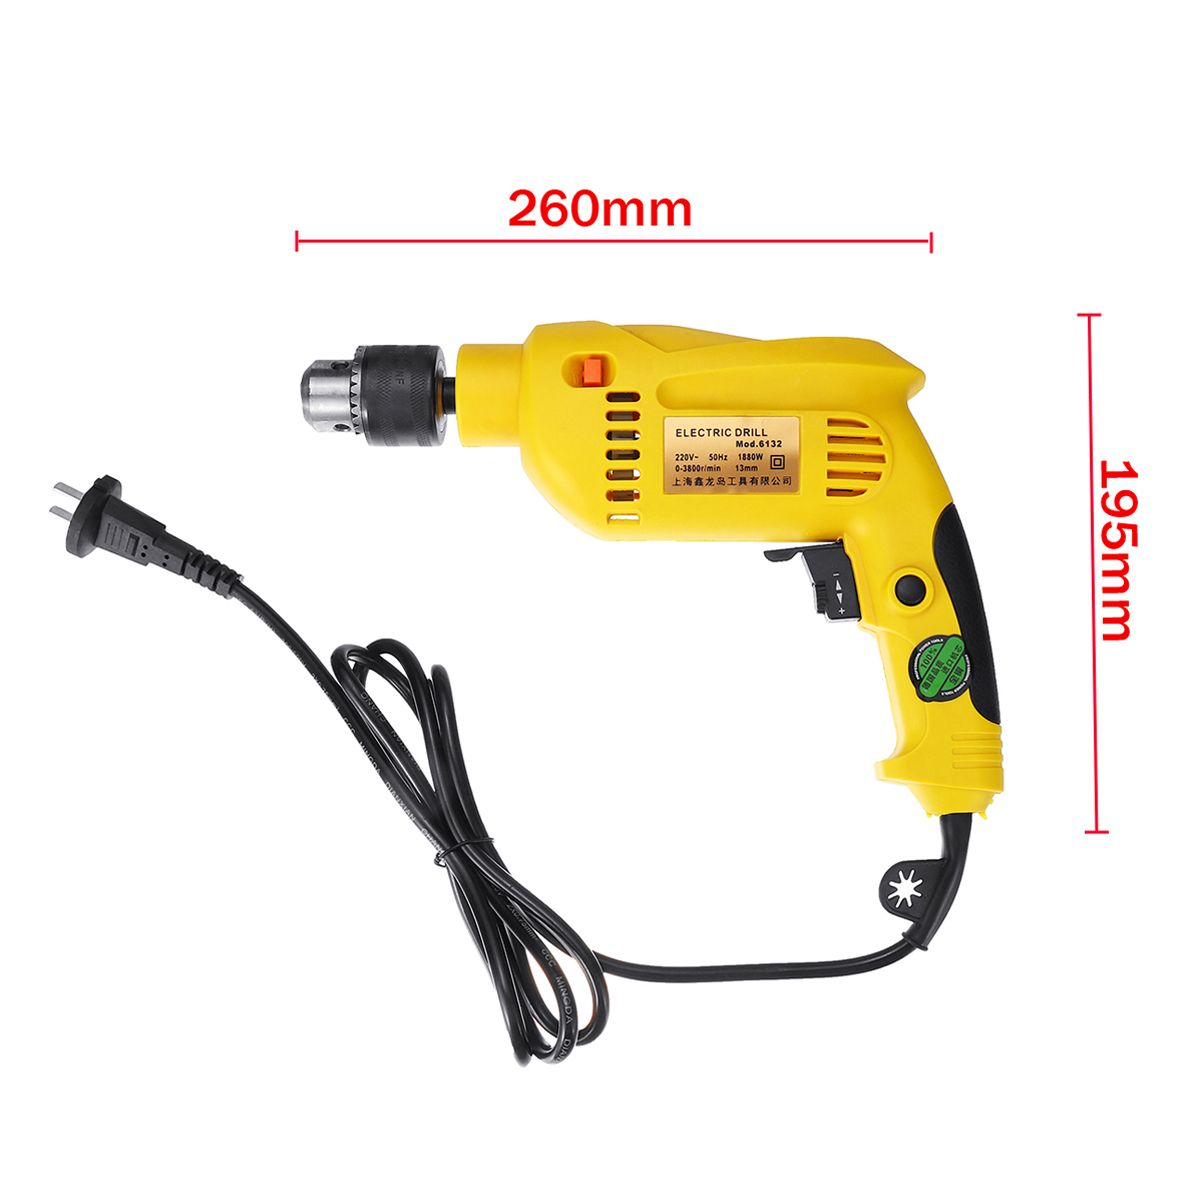 1880W-3800rpm-Electric-Impact-Drill-Wrench-13mm-Chuck-Brushless-Motor-Power-Tools-1529030